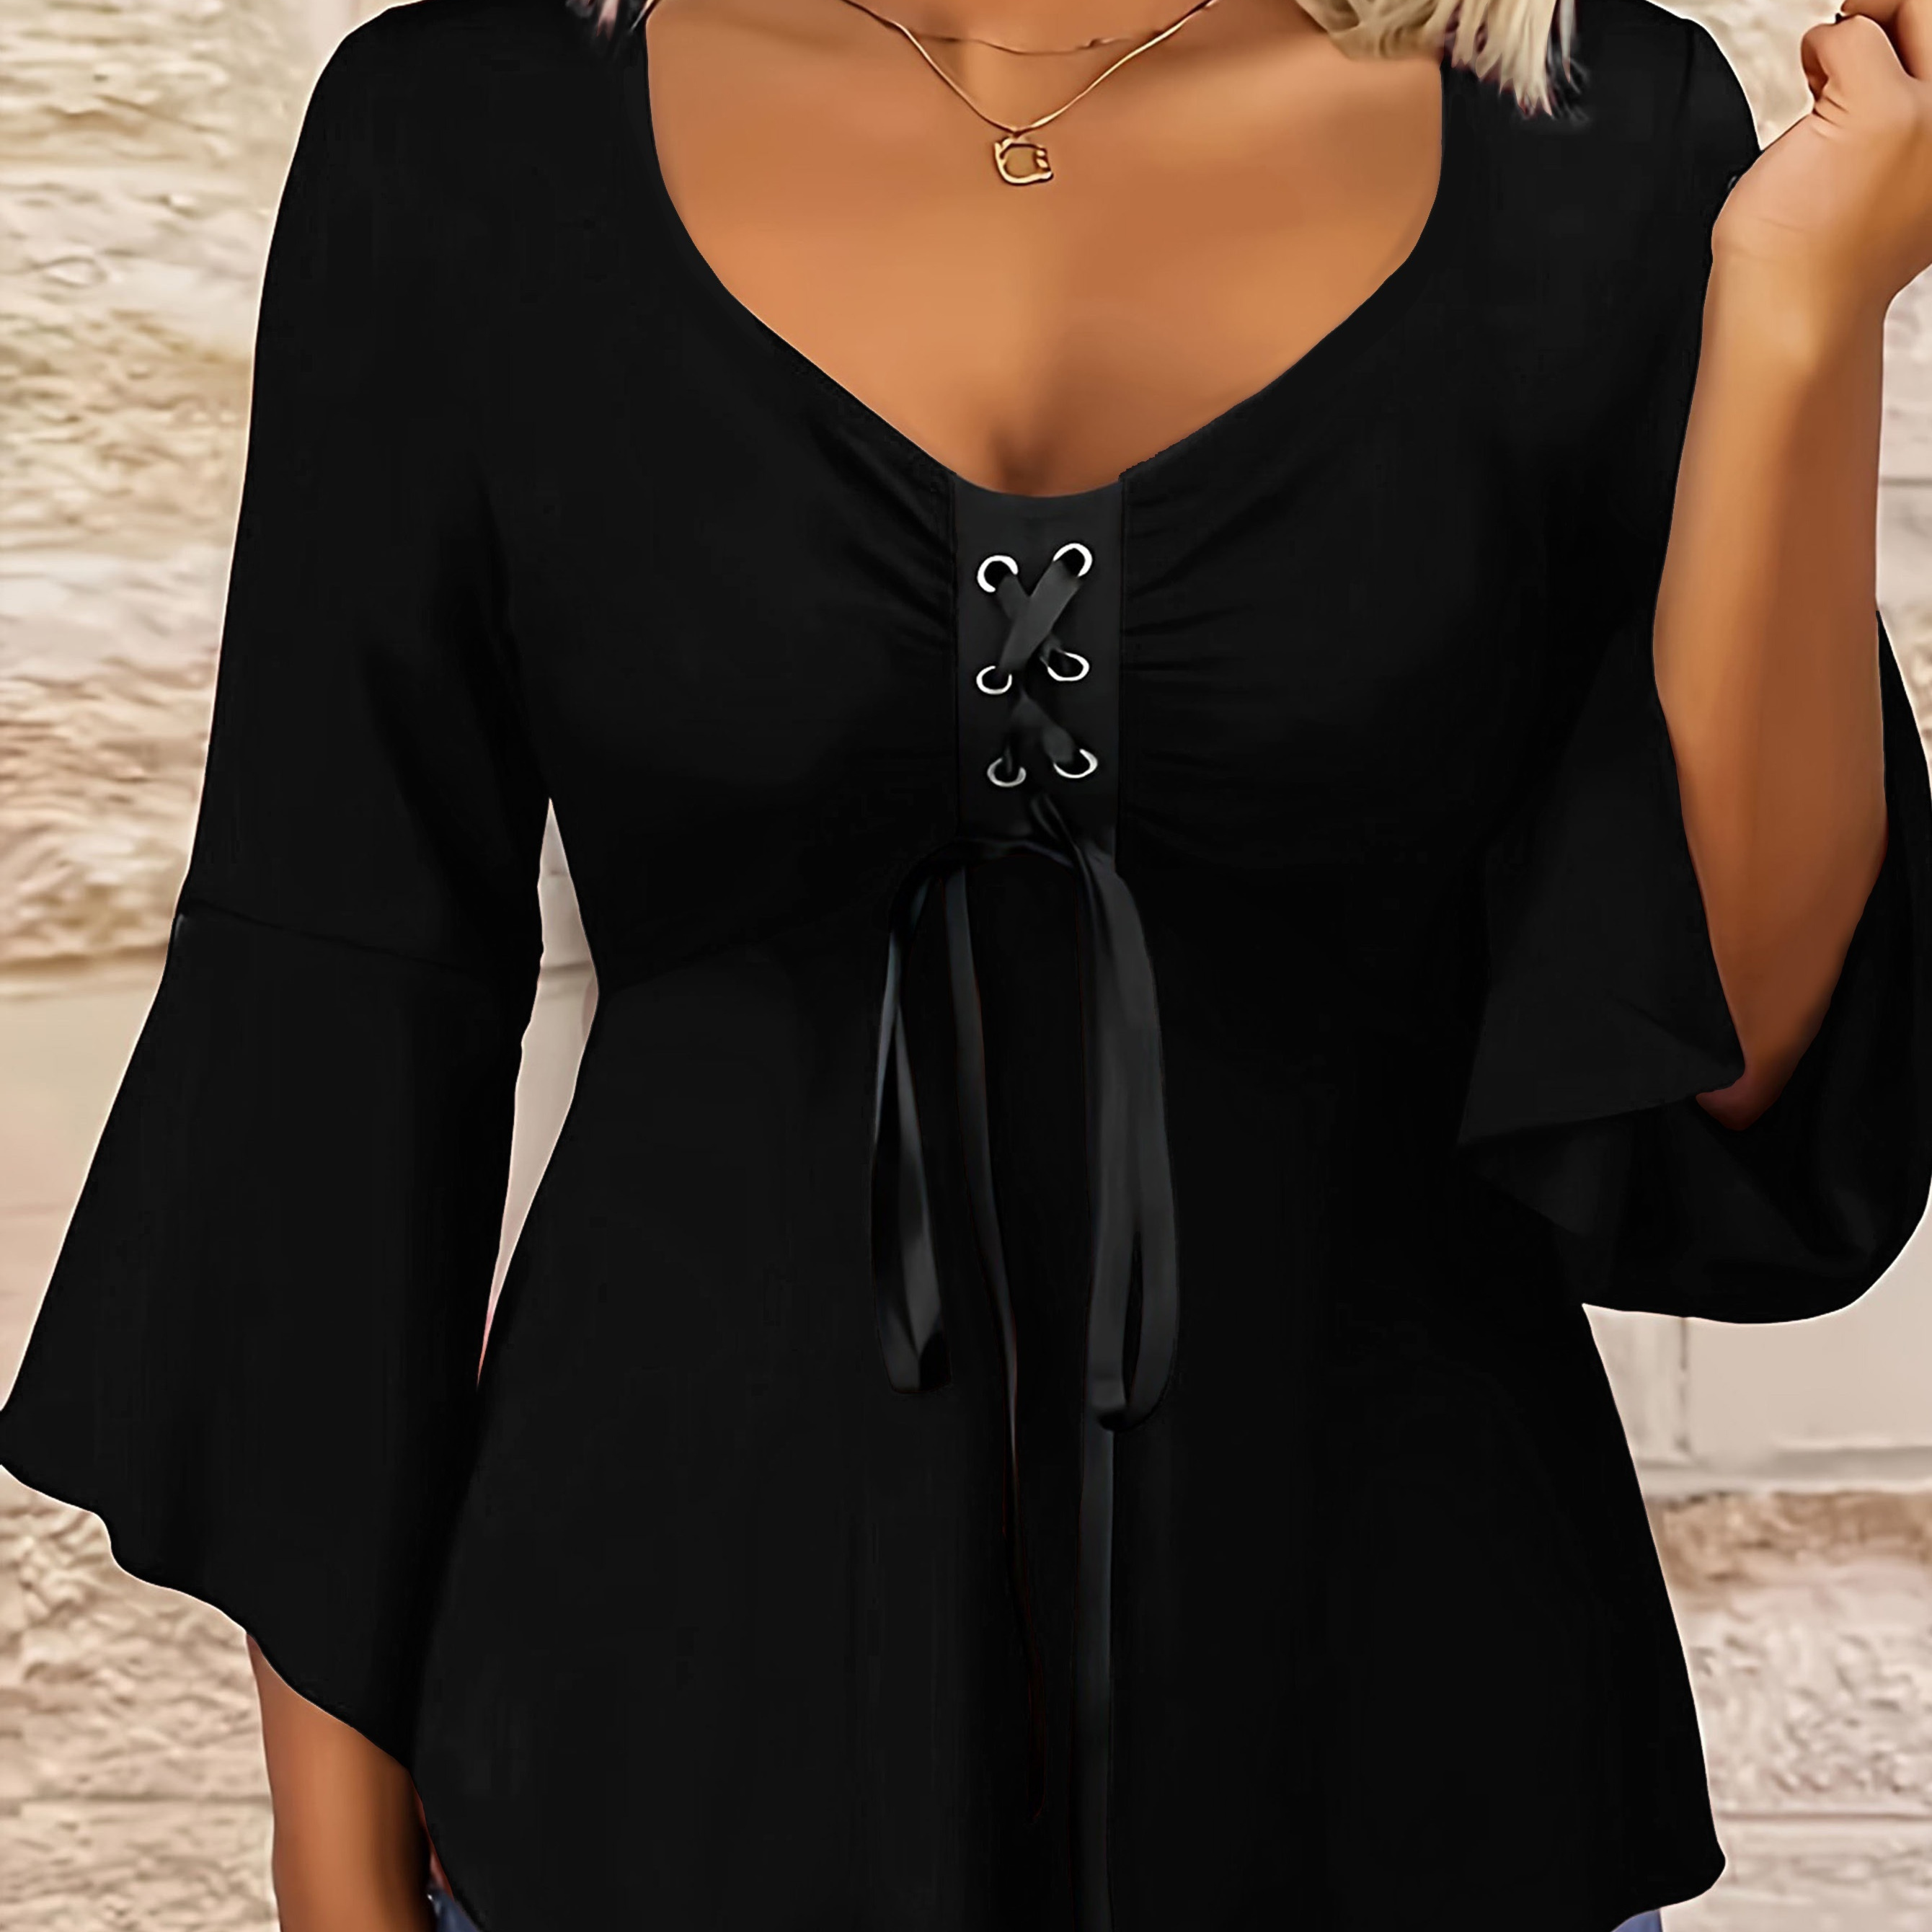 

Plus Sized Crisscross Lace Up T-shirt, Elegant Bell Sleeve Ruffle Hem Top For Spring & Fall, Women's Plus Size Clothing